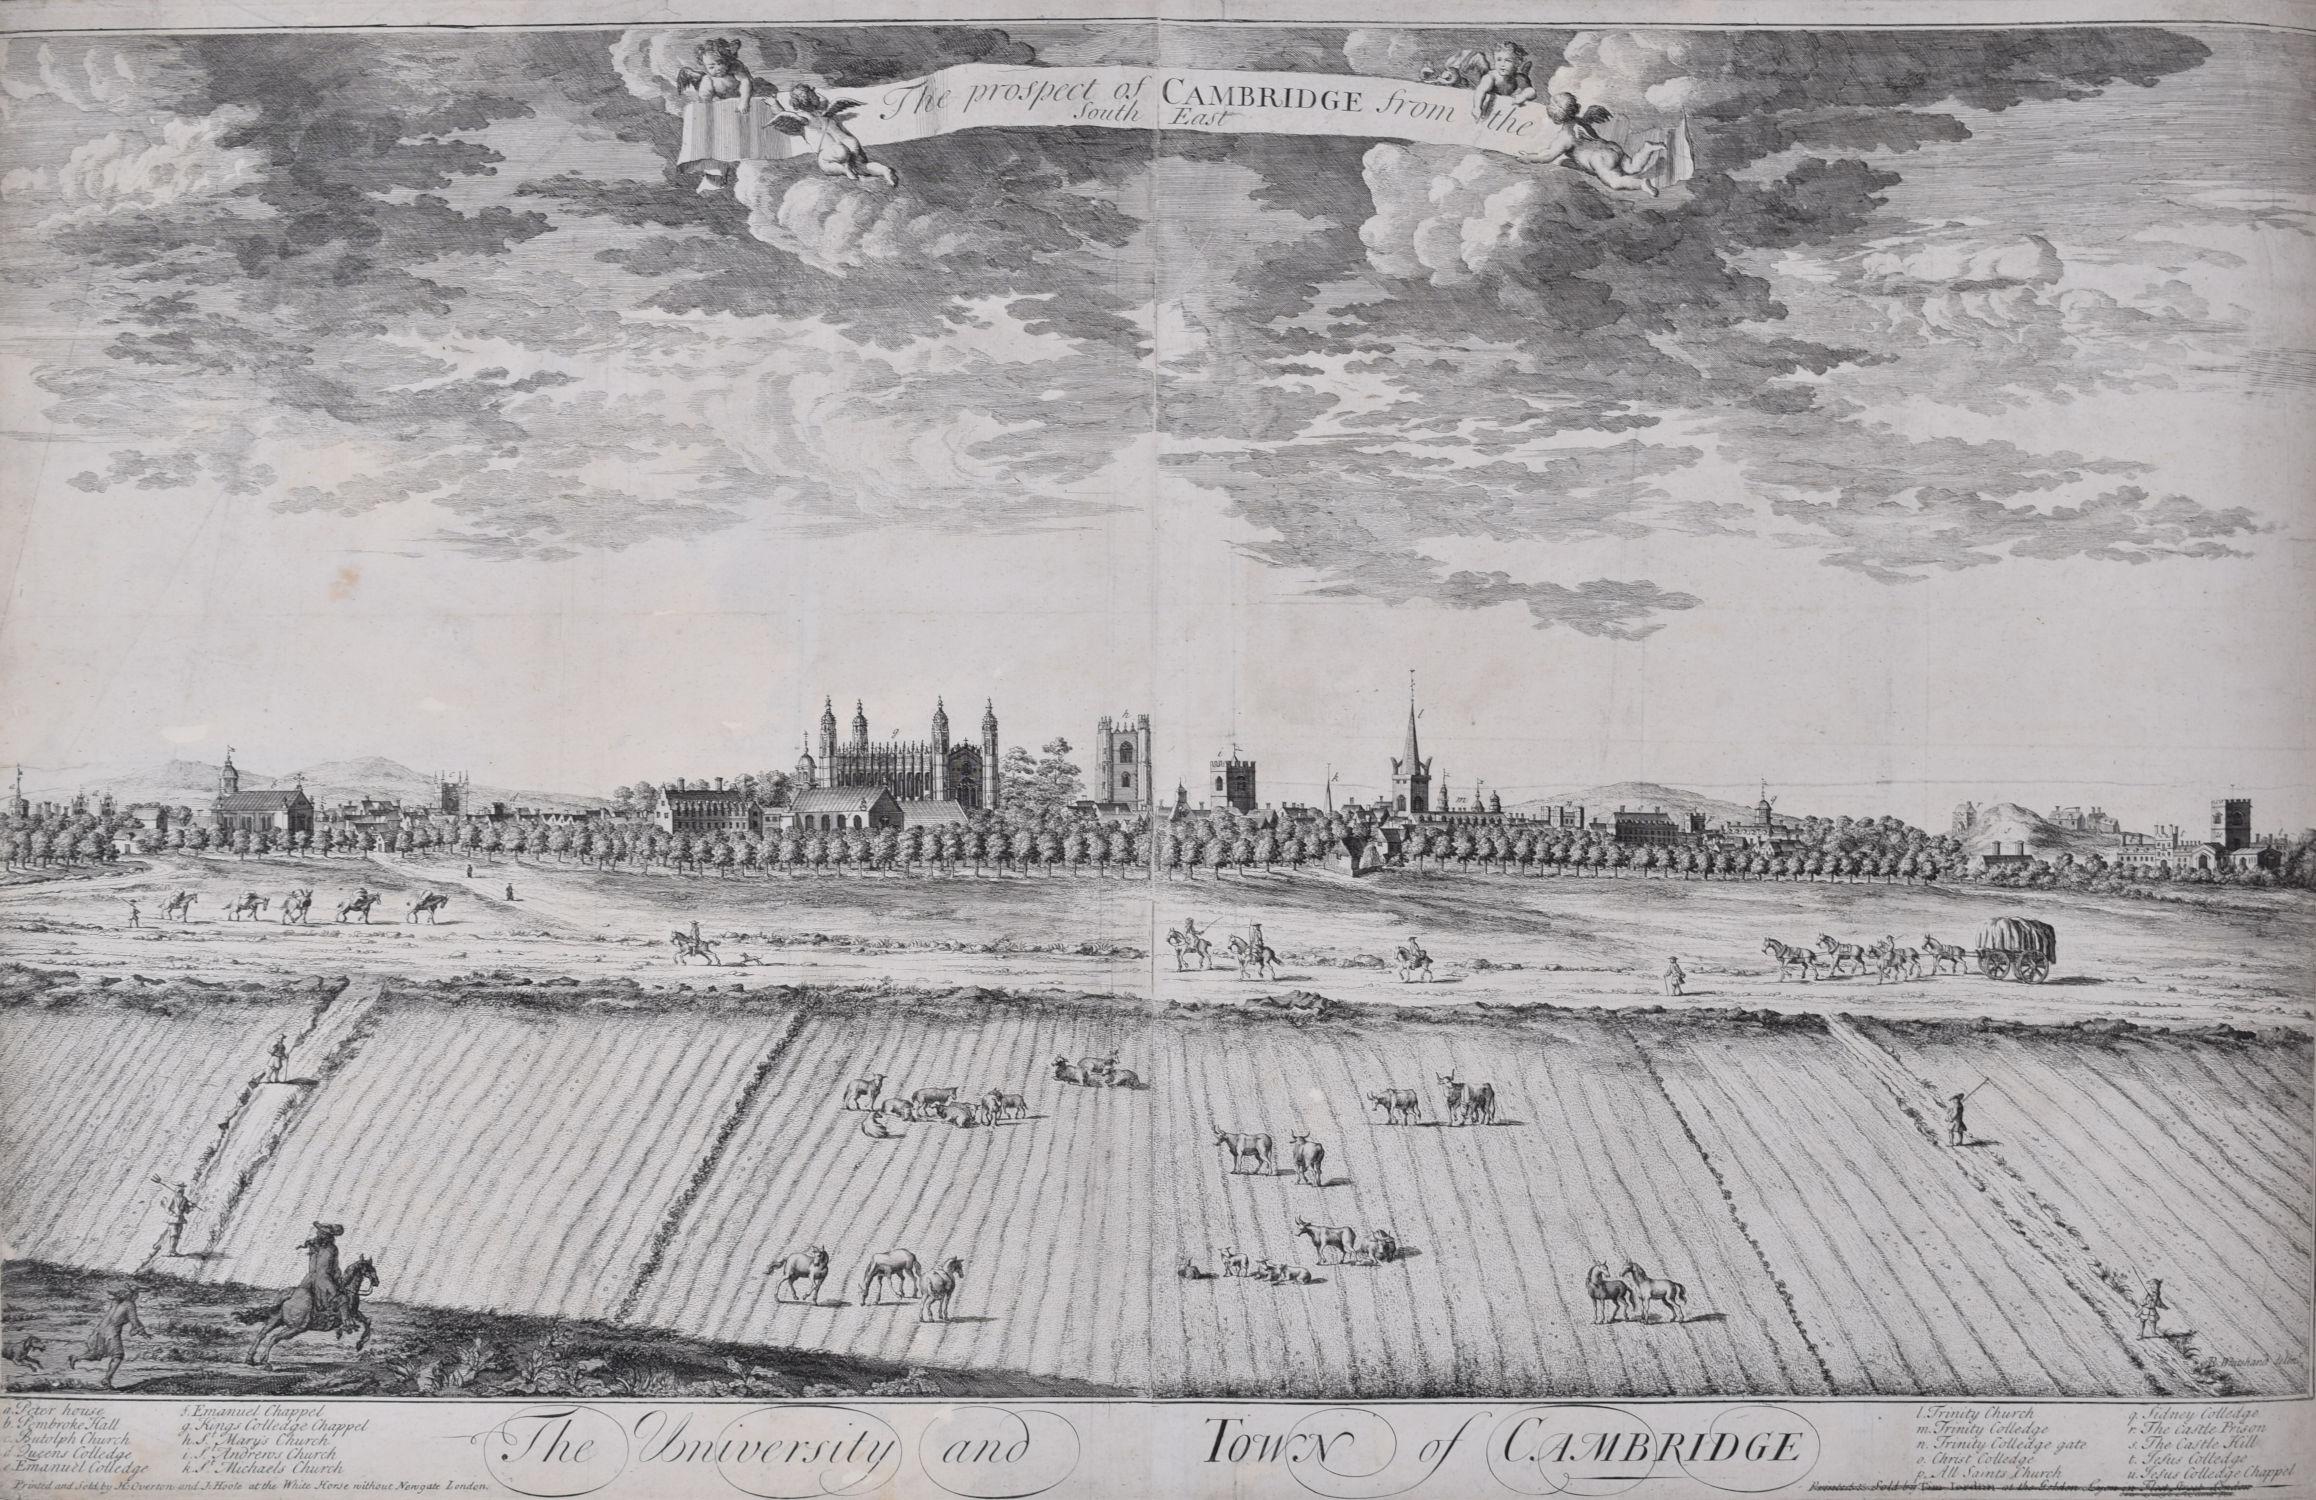 To see our other views of Oxford and Cambridge, scroll down to "More from this Seller" and below it click on "See all from this Seller" - or send us a message if you cannot find the view you want.

Johannes Kip (1652 - 1722) after R